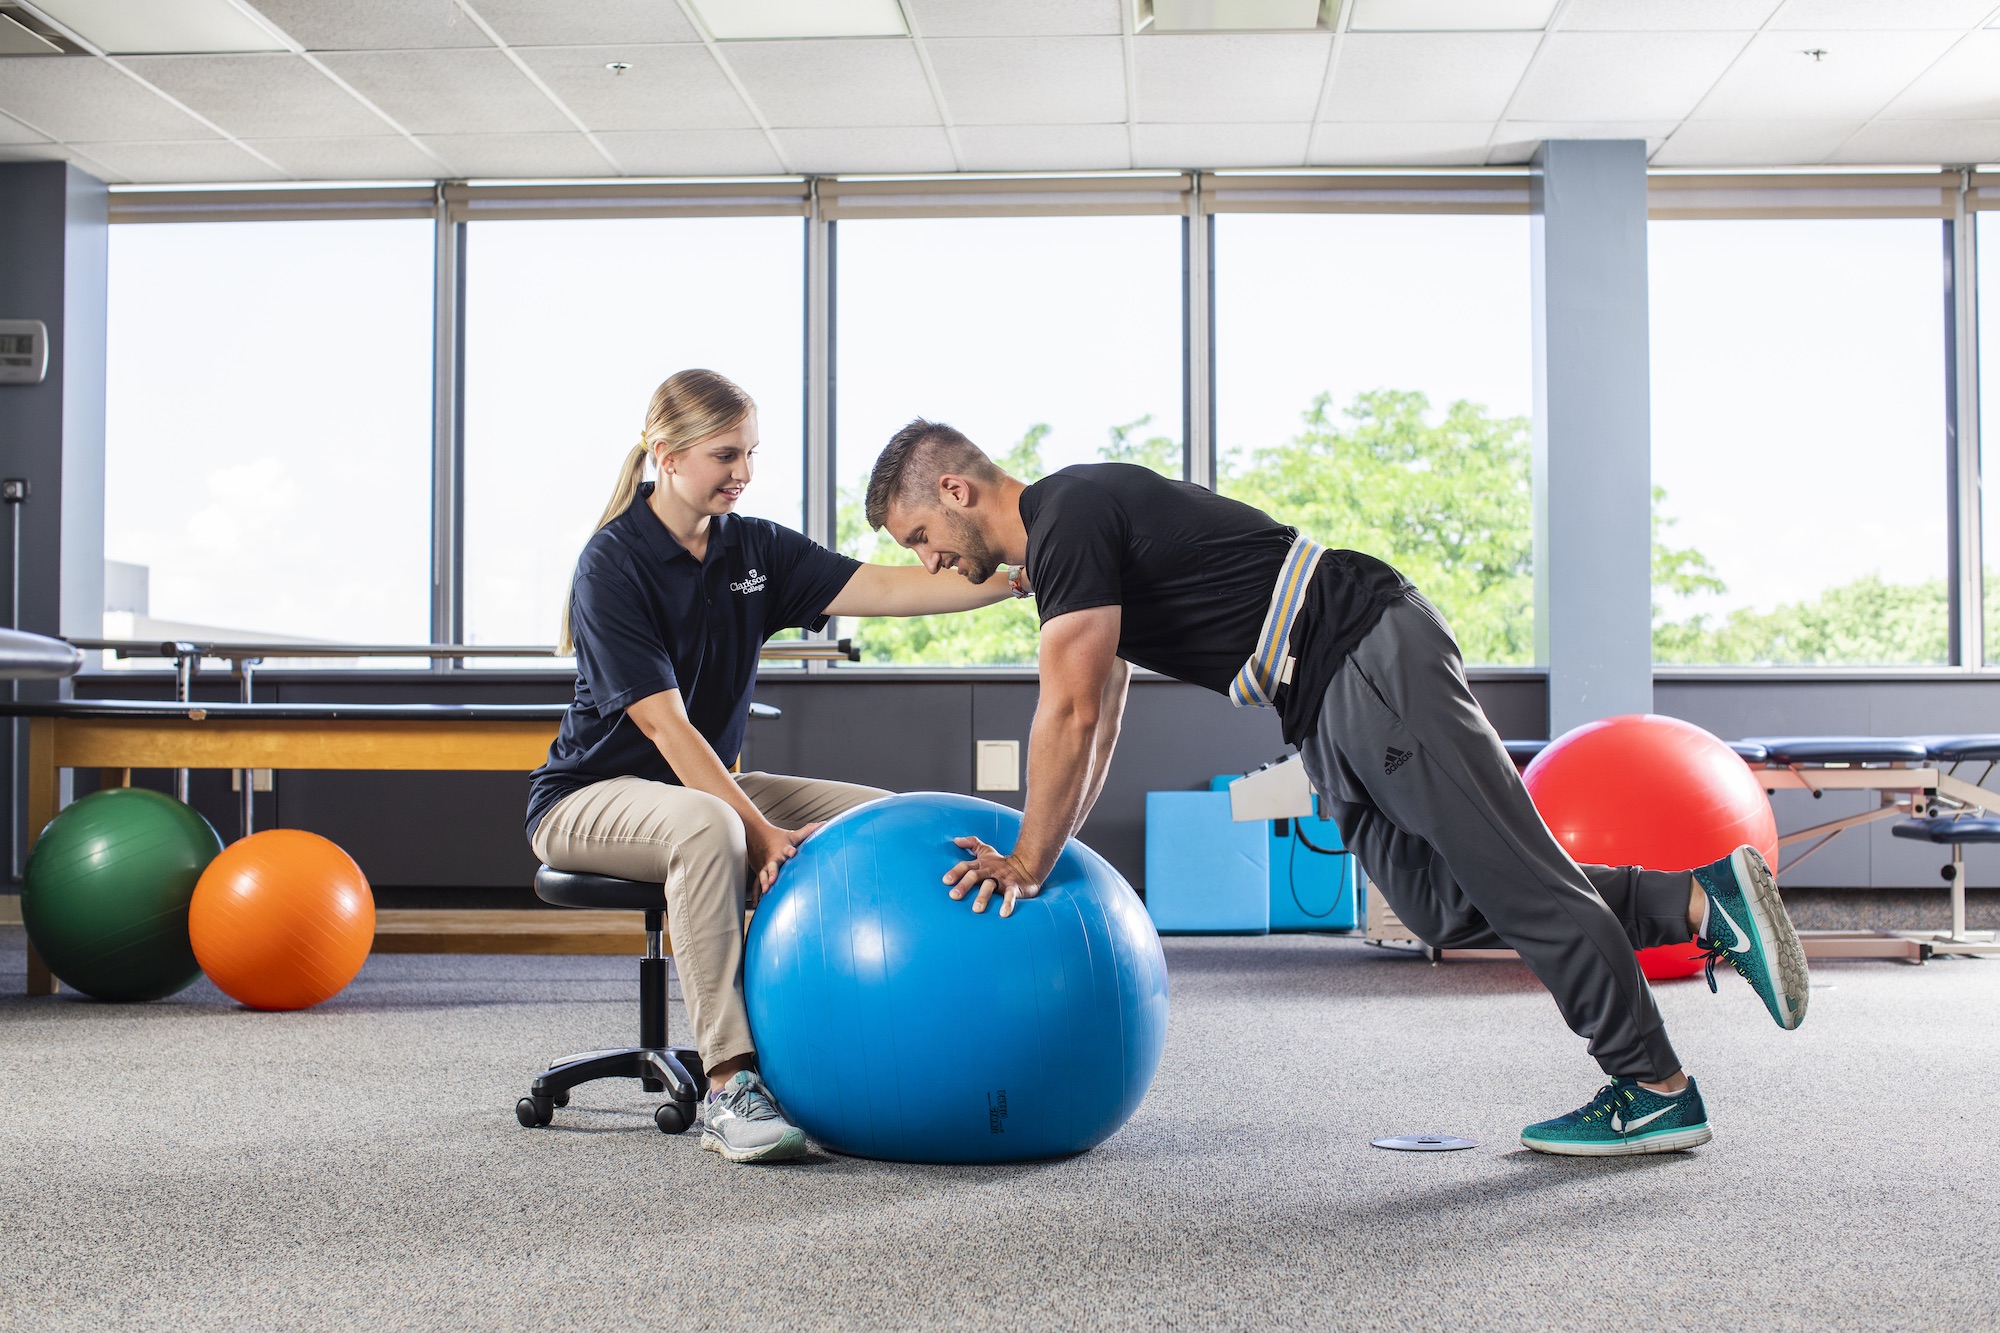  online transfer Associate’s degree in Physical Therapist Assistant (PTA) option